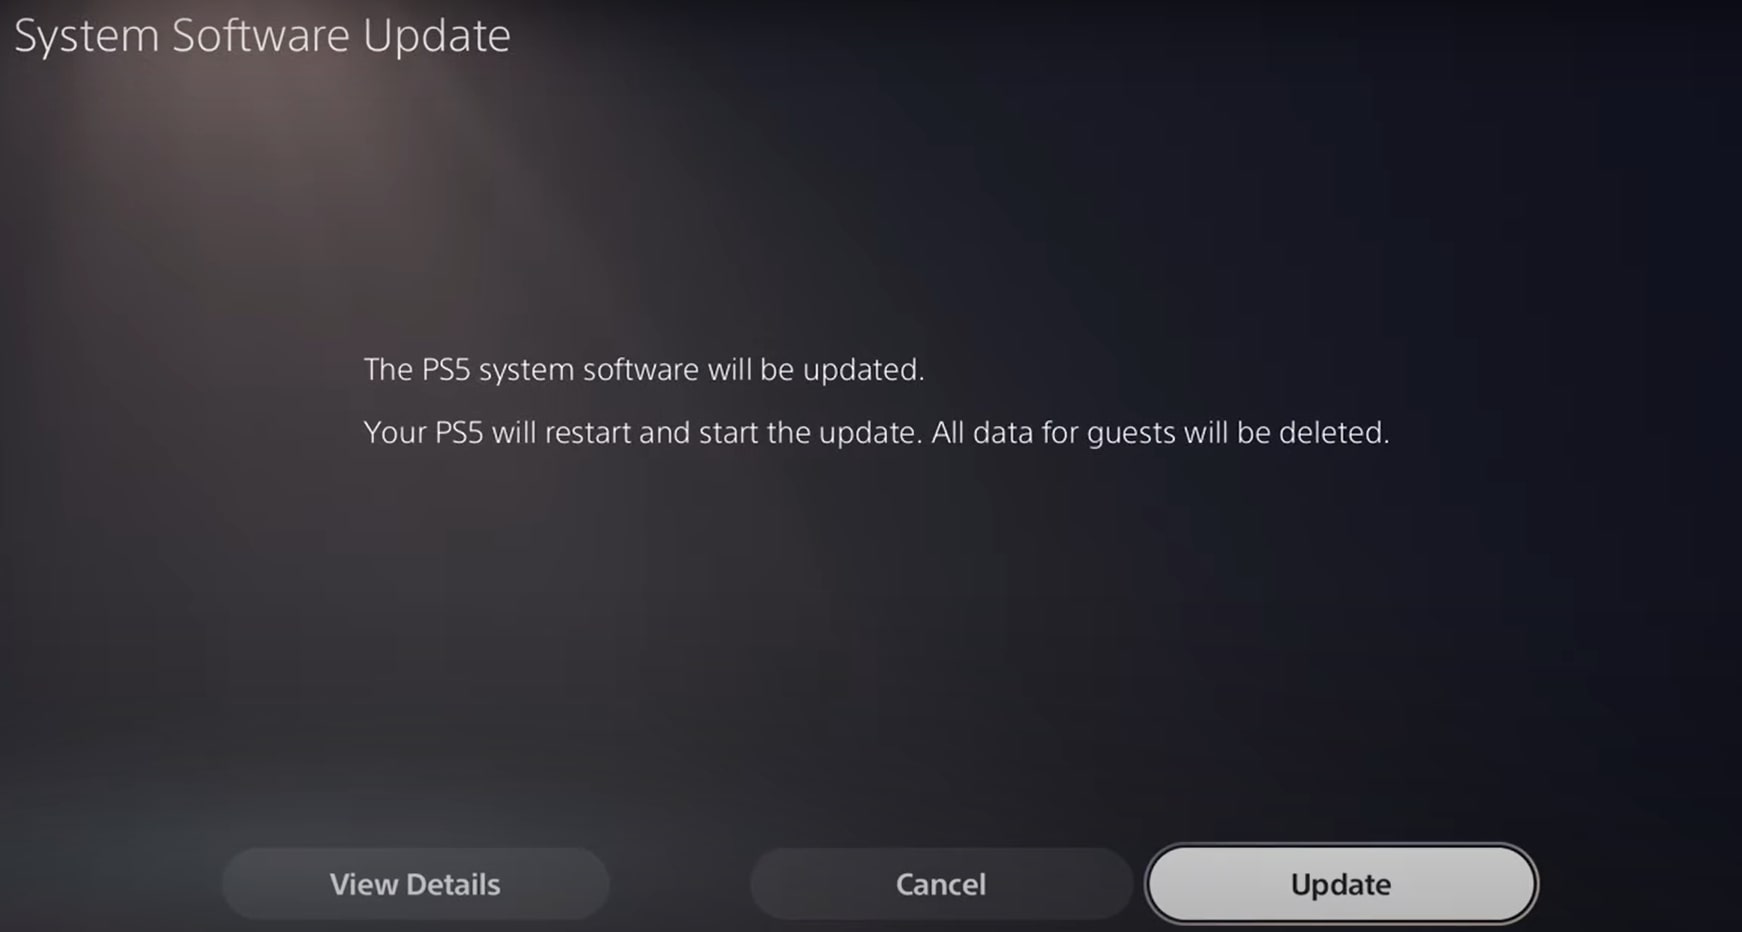 The software will be updated